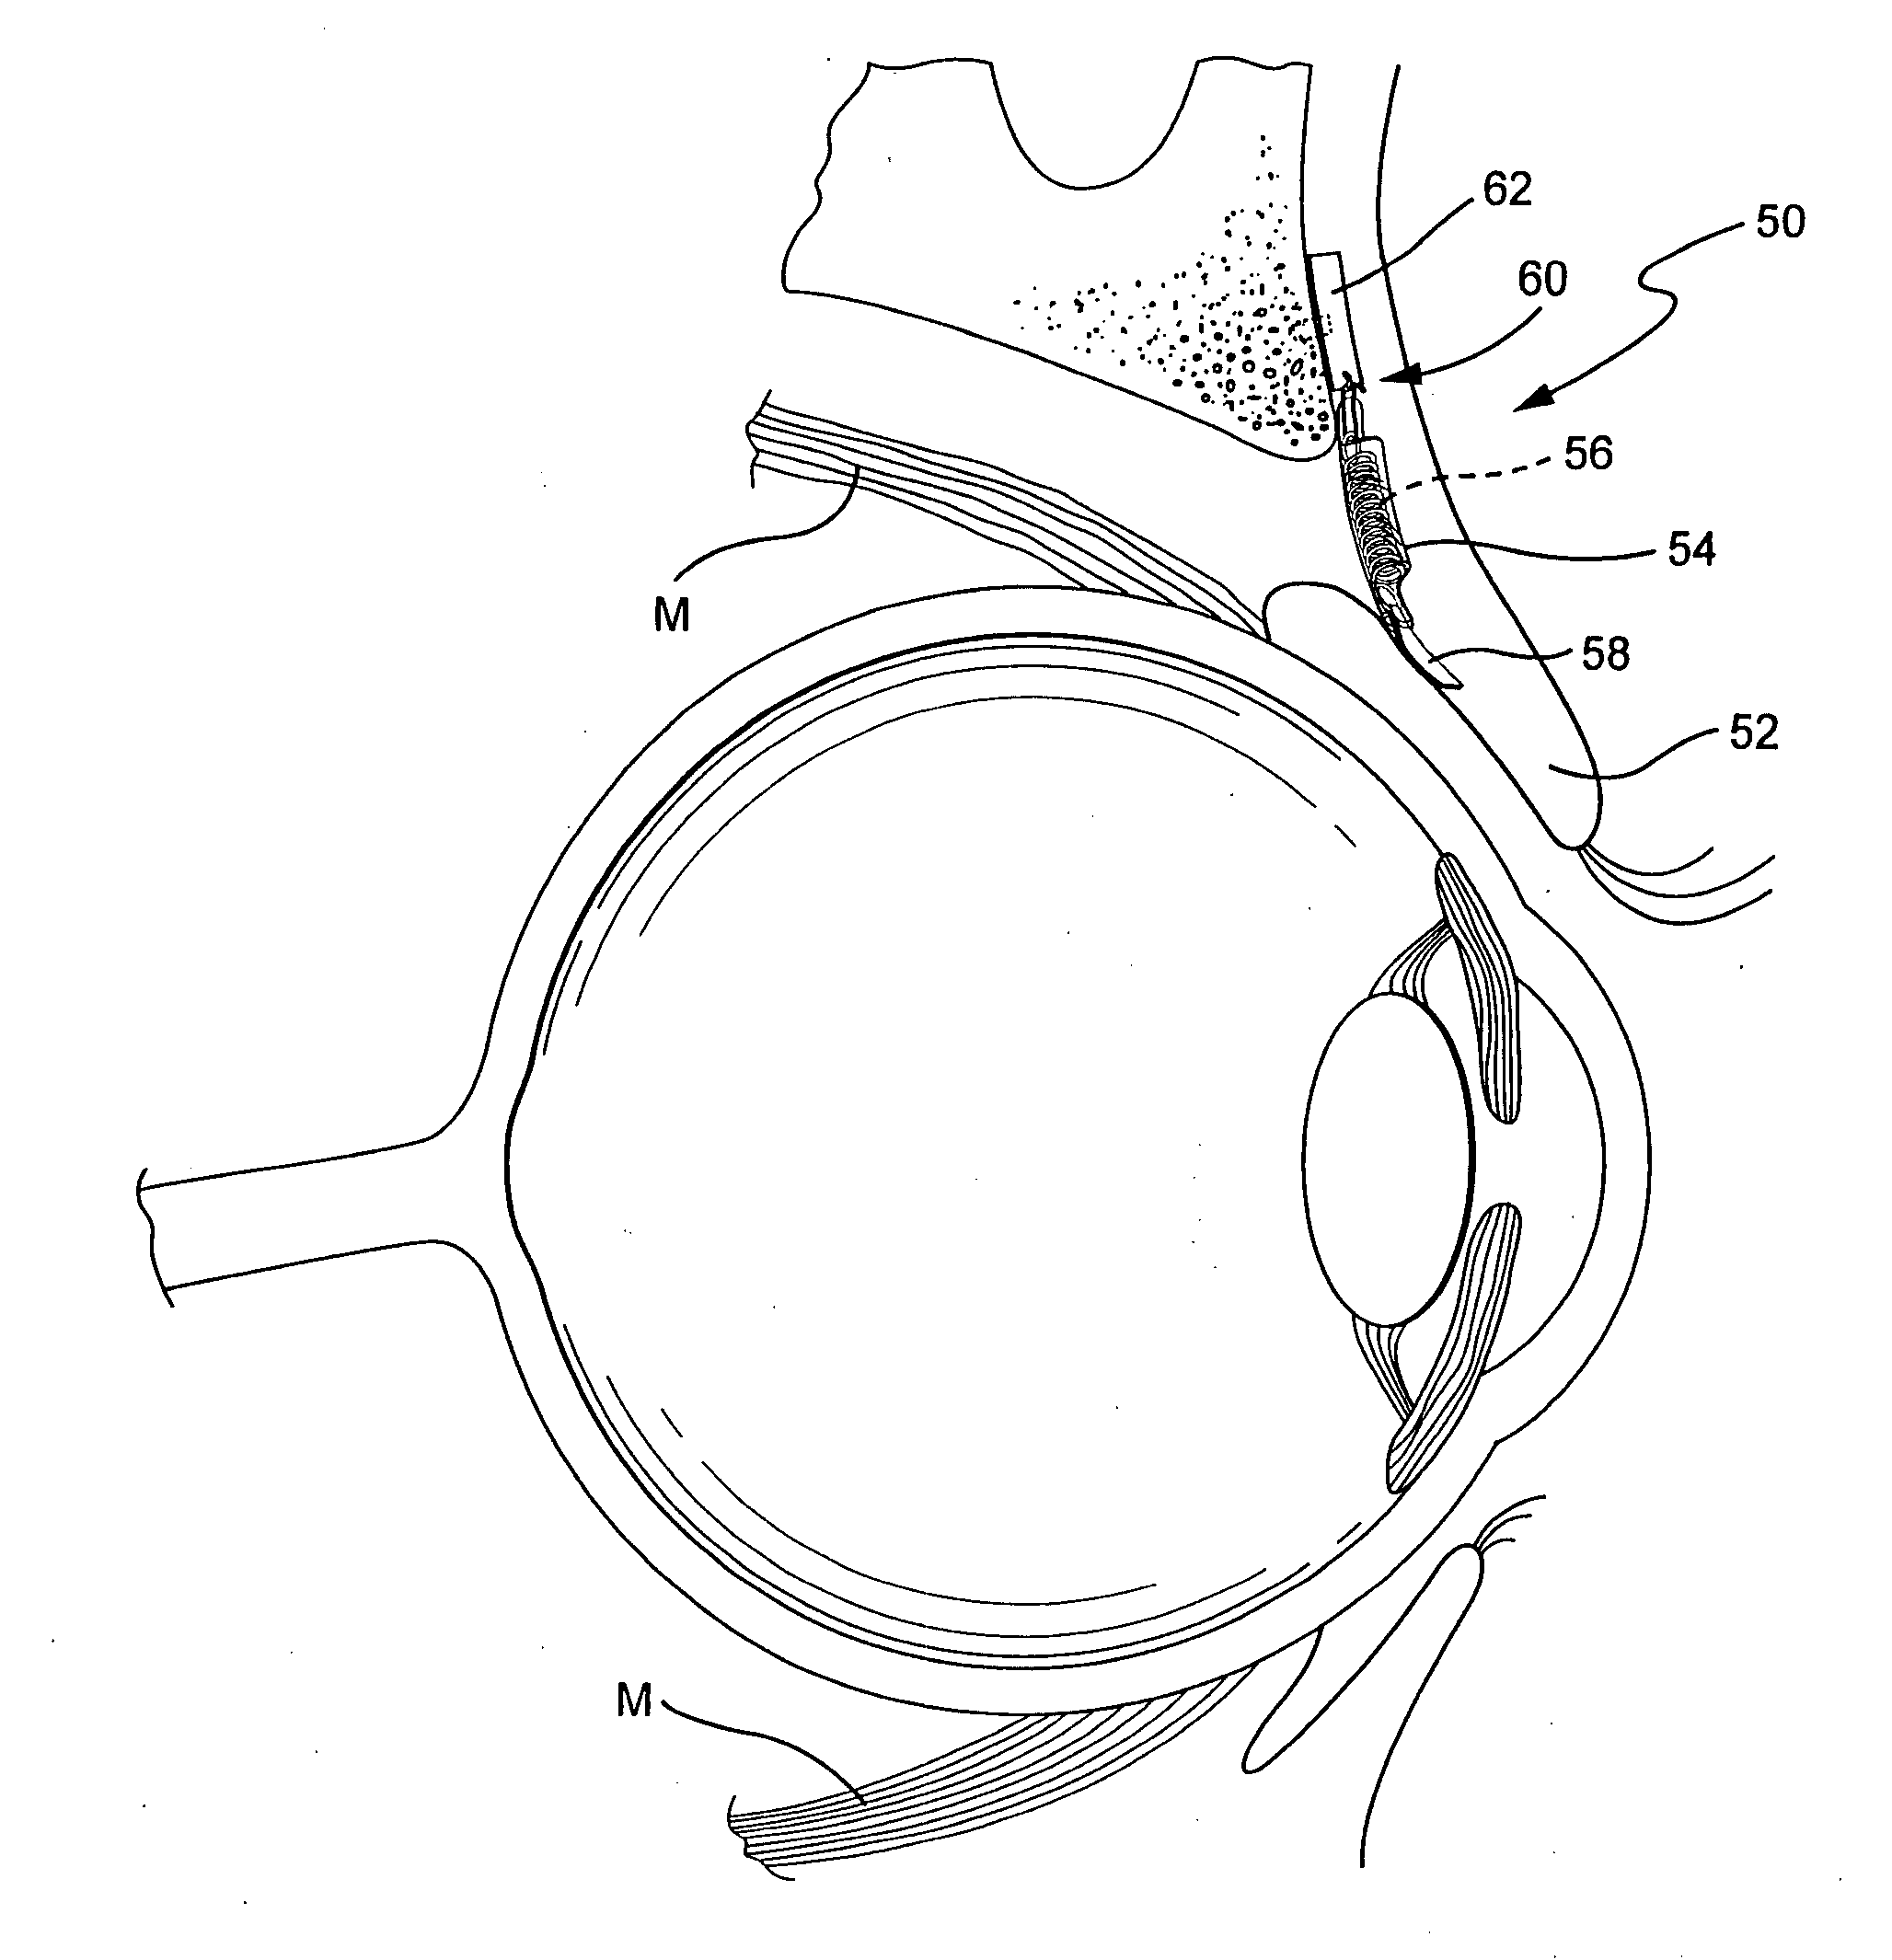 Extraocular muscle prosthesis